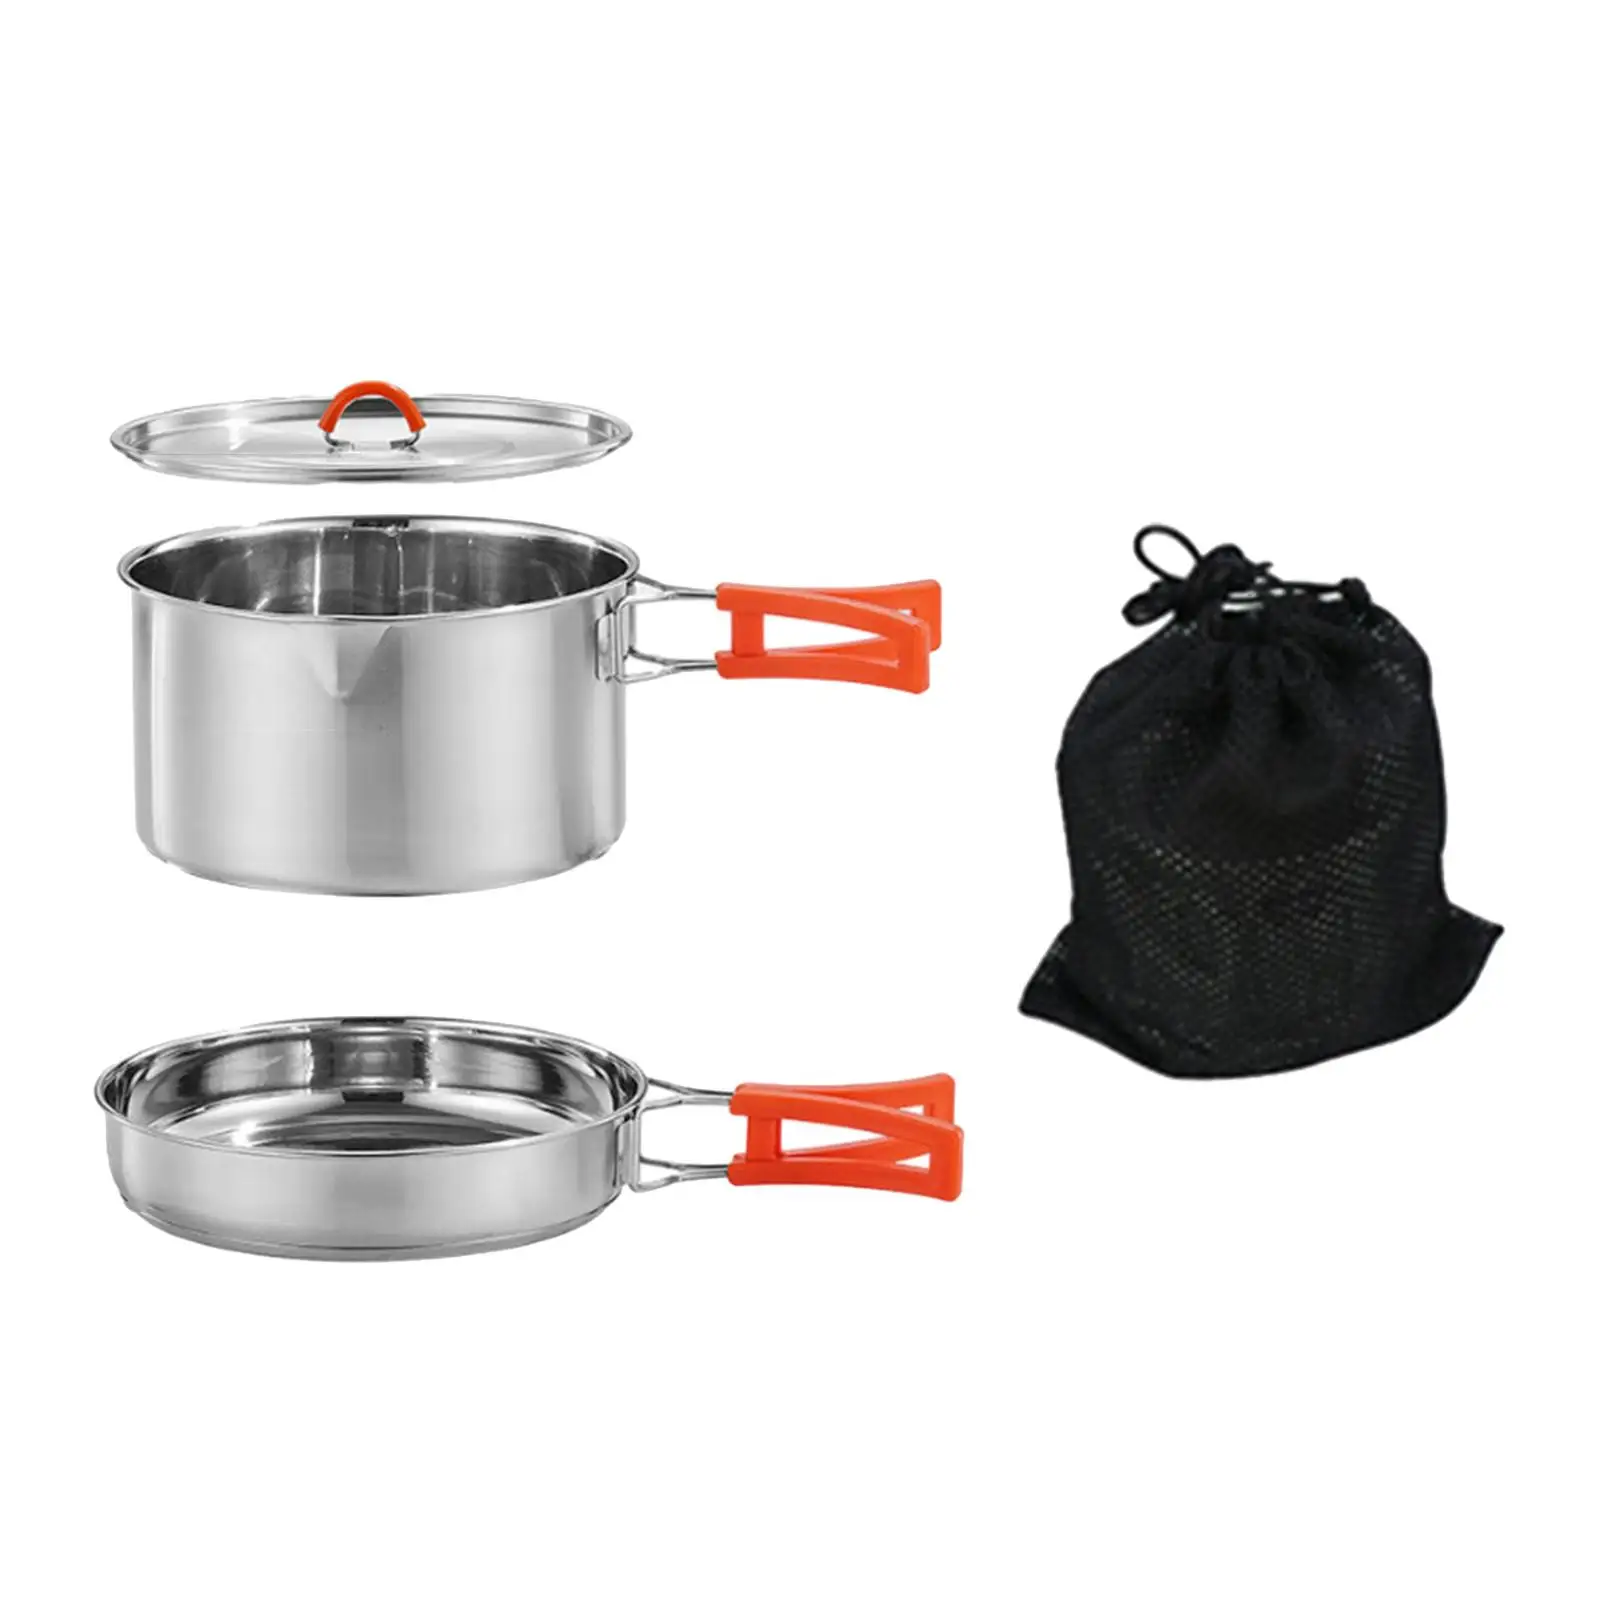 Camping Cookware Set Easy to Clean Stainless Steel Camping Pot and Pan for Picnic Hiking Backpacking Accessories Equipment